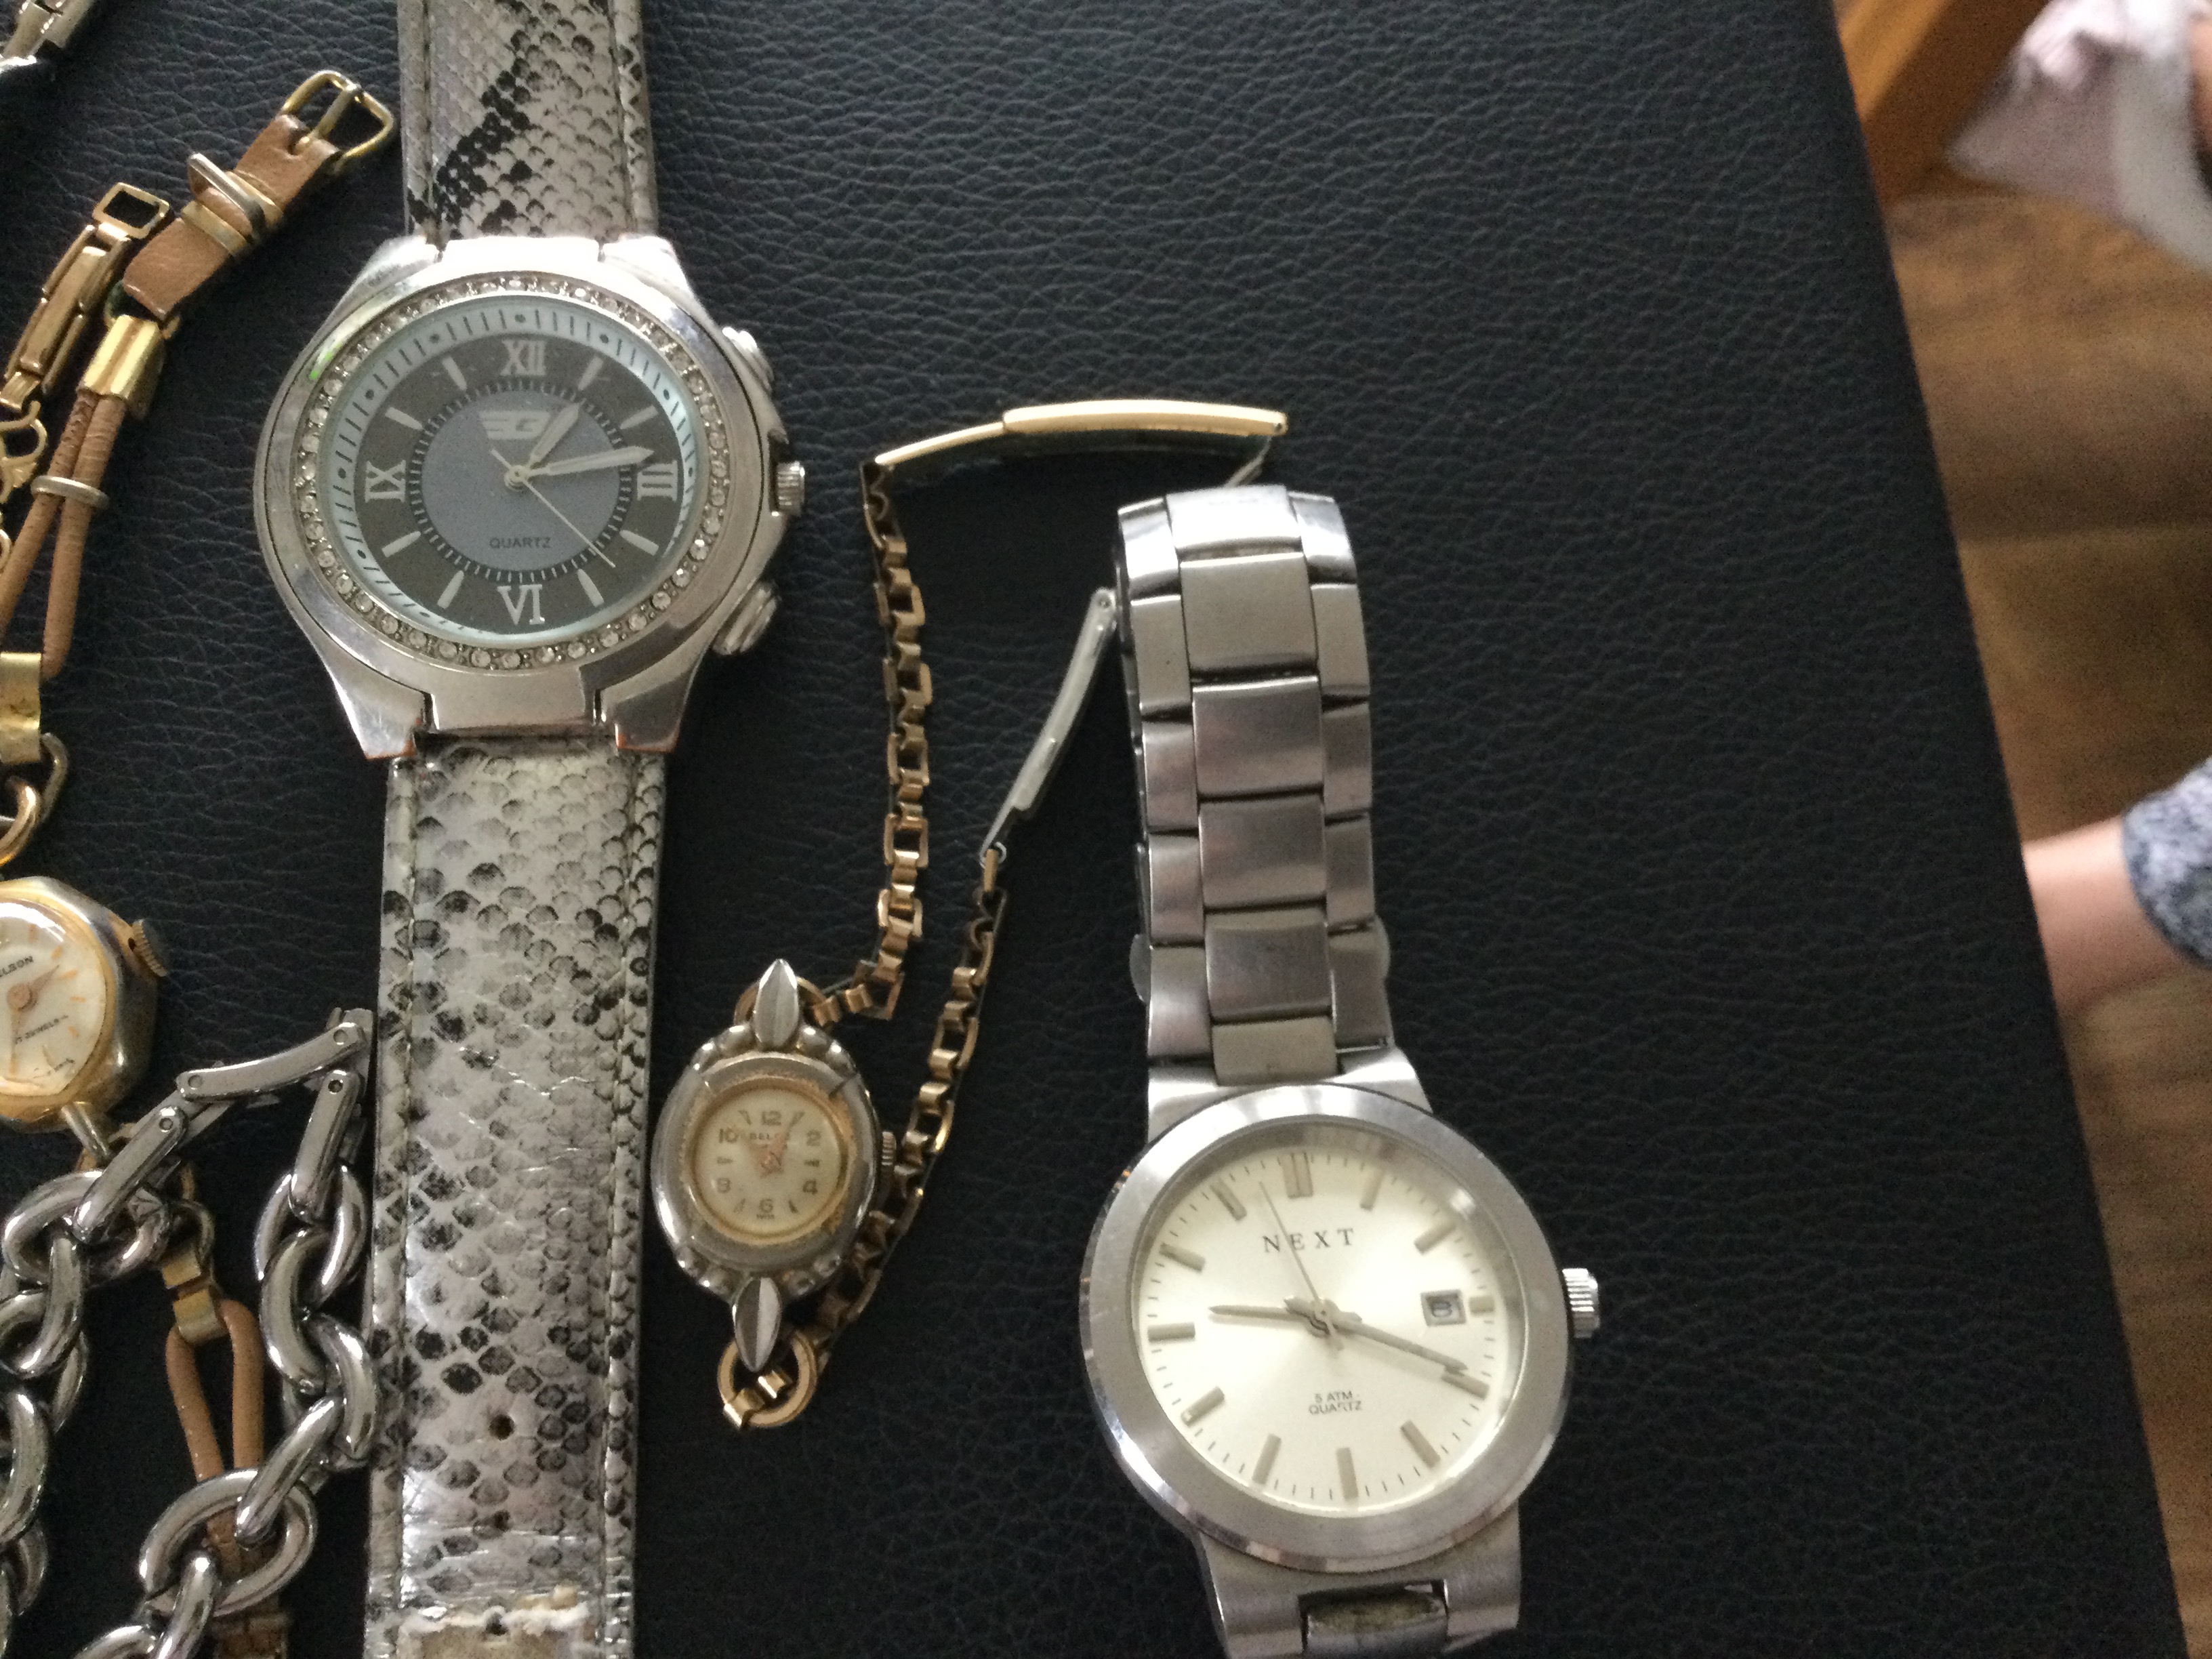 Collection of 11 Watches, Next, Cavalli, Ice, Giorgio, Nelson Etc (GS 29) - Image 4 of 7